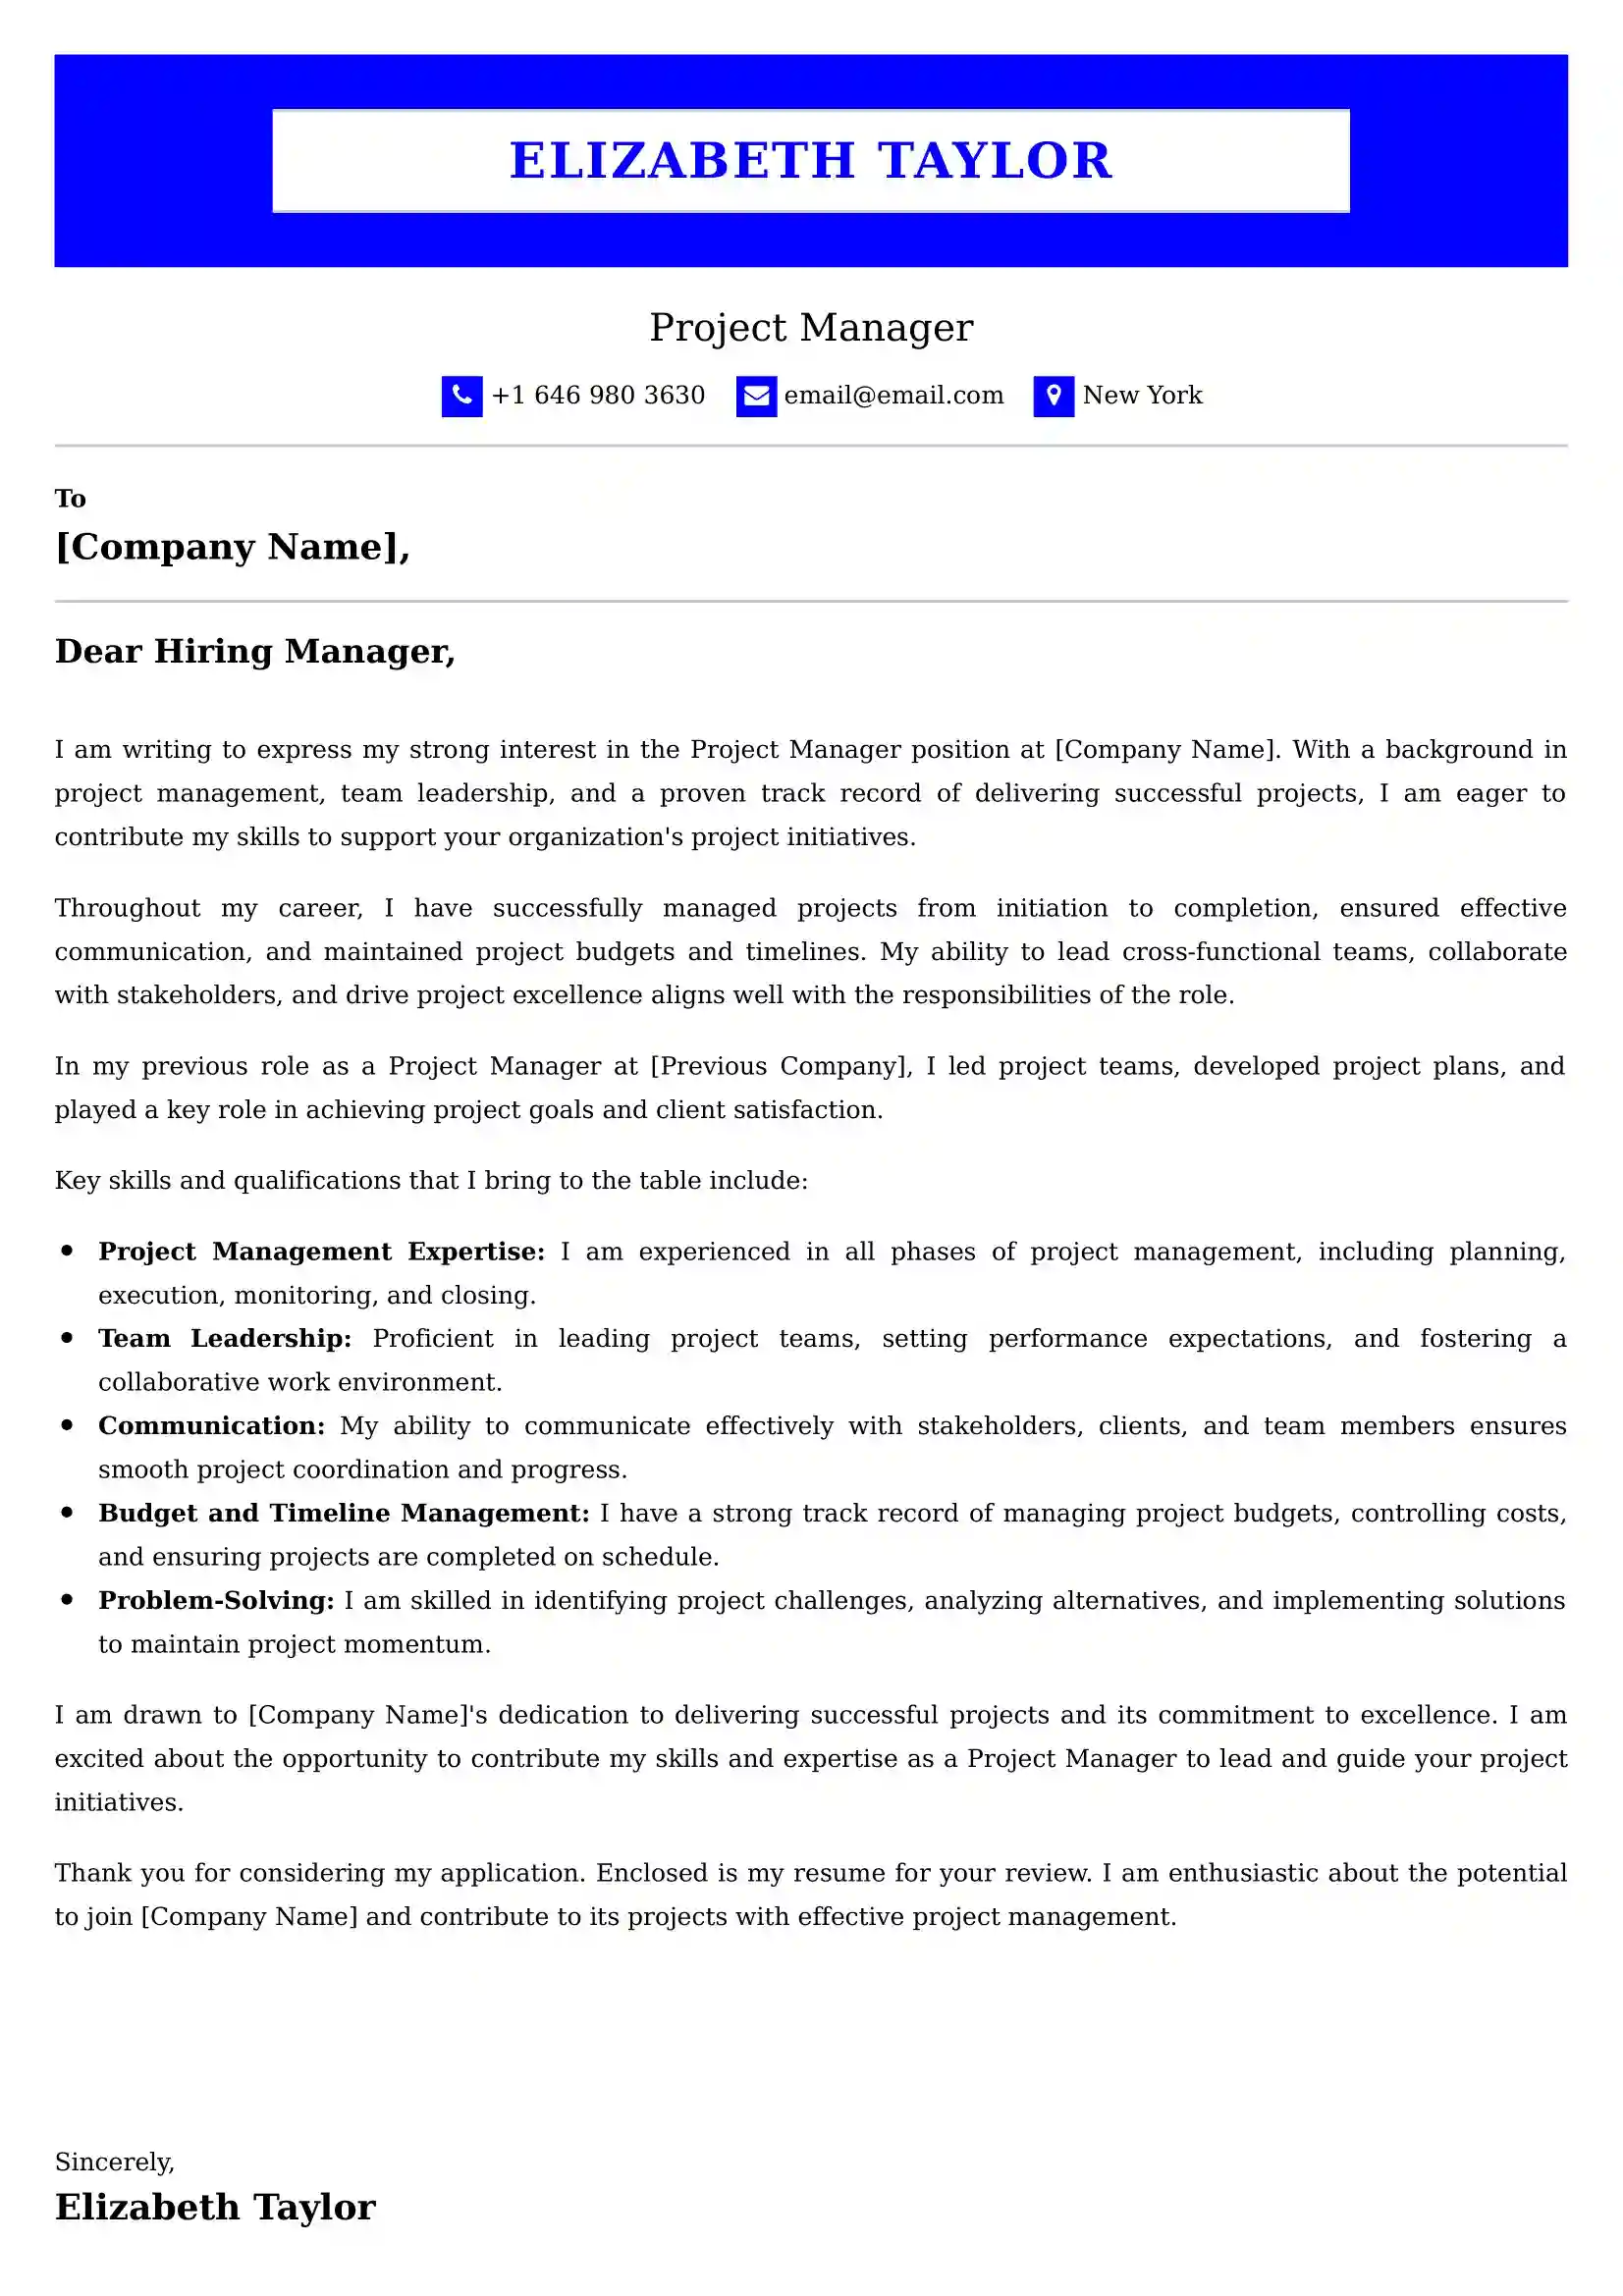 Project Manager Cover Letter Examples UK - Tips and Guide